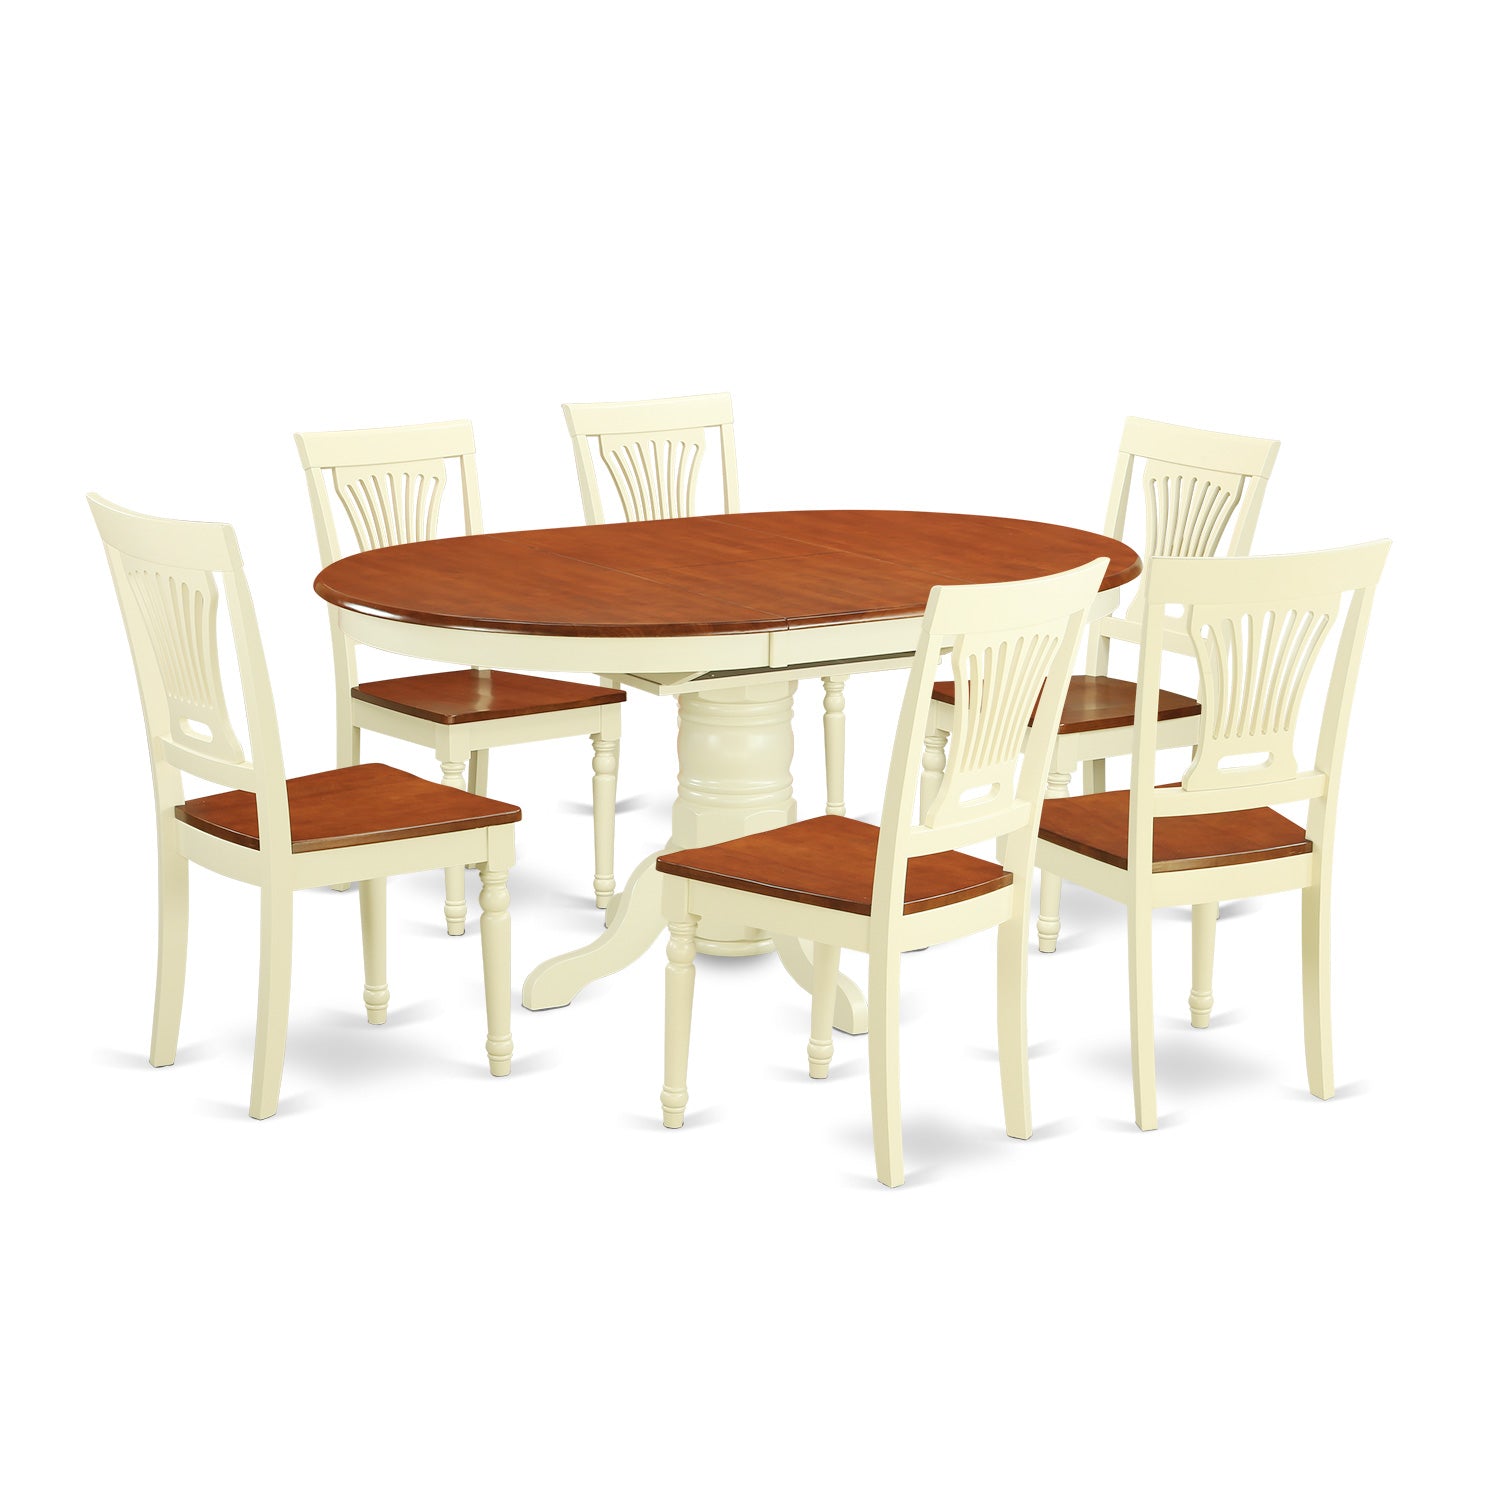 Kenley 7 Pc Oval Dining Room Table with leaf and 6 Chairs Set in Buttermilk / Cherry